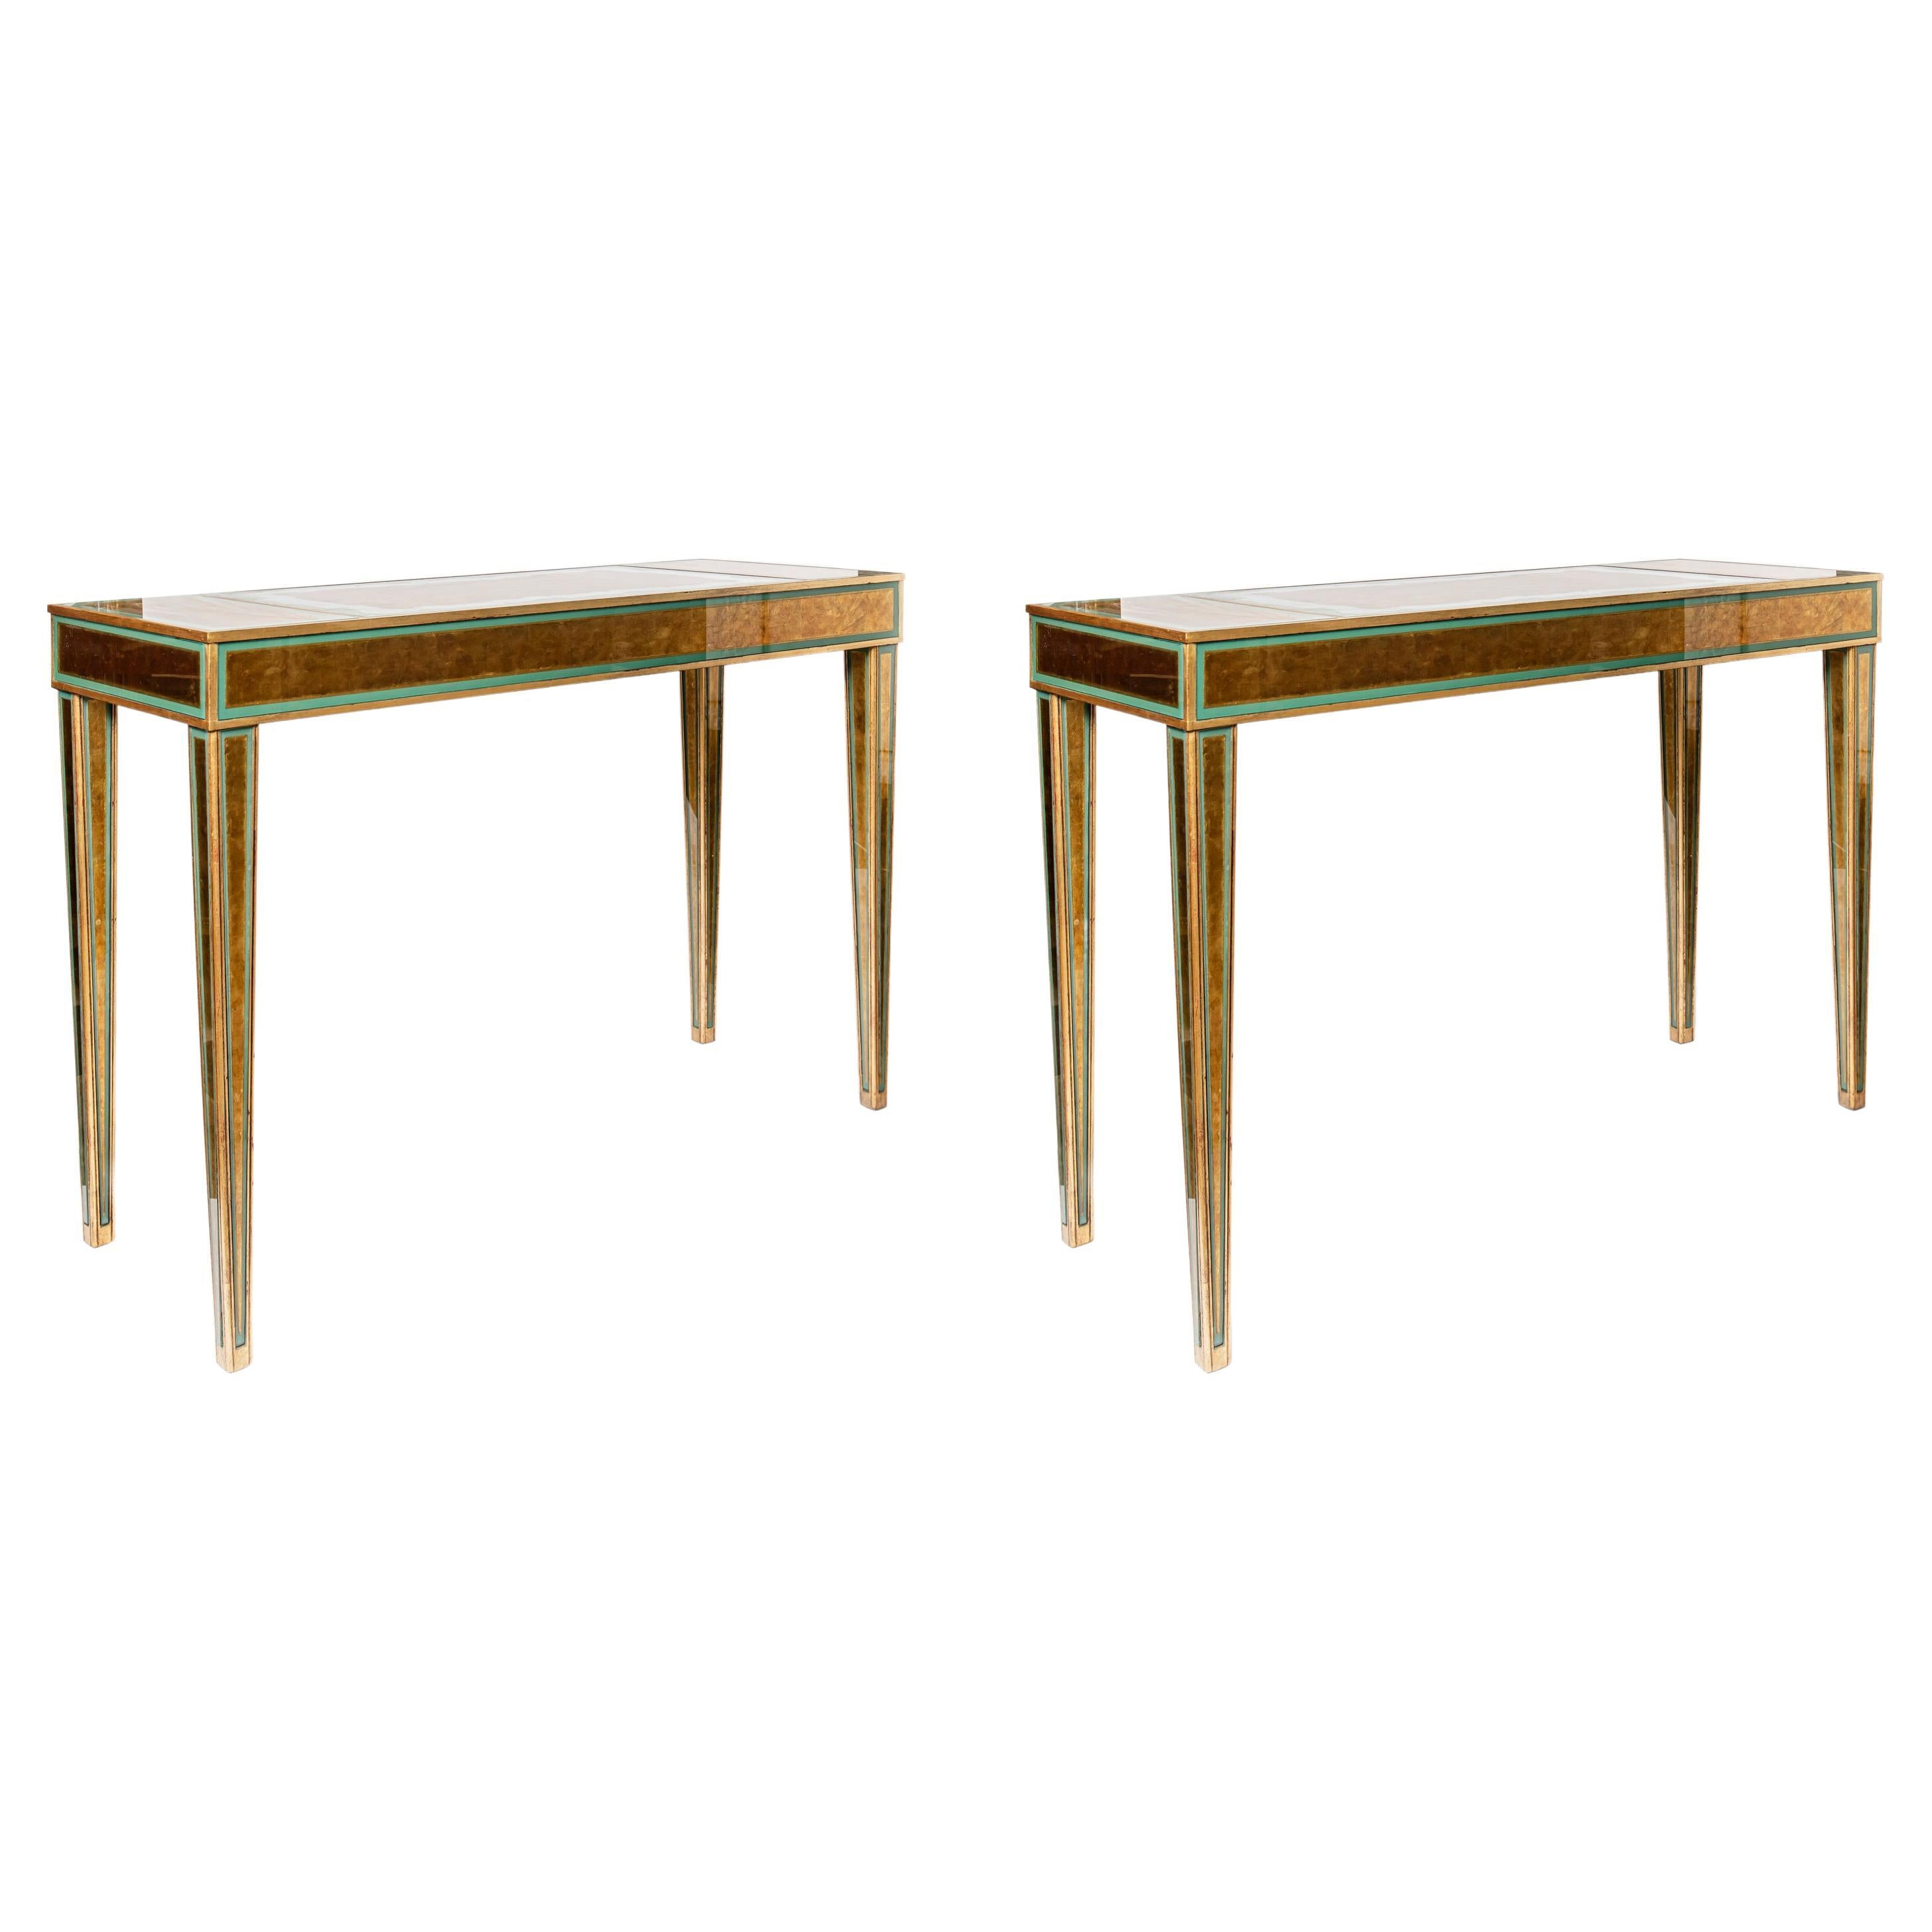 Pair of Wood and Glass Consoles, Attributed to Maison Jansen, France, circa 1940 For Sale